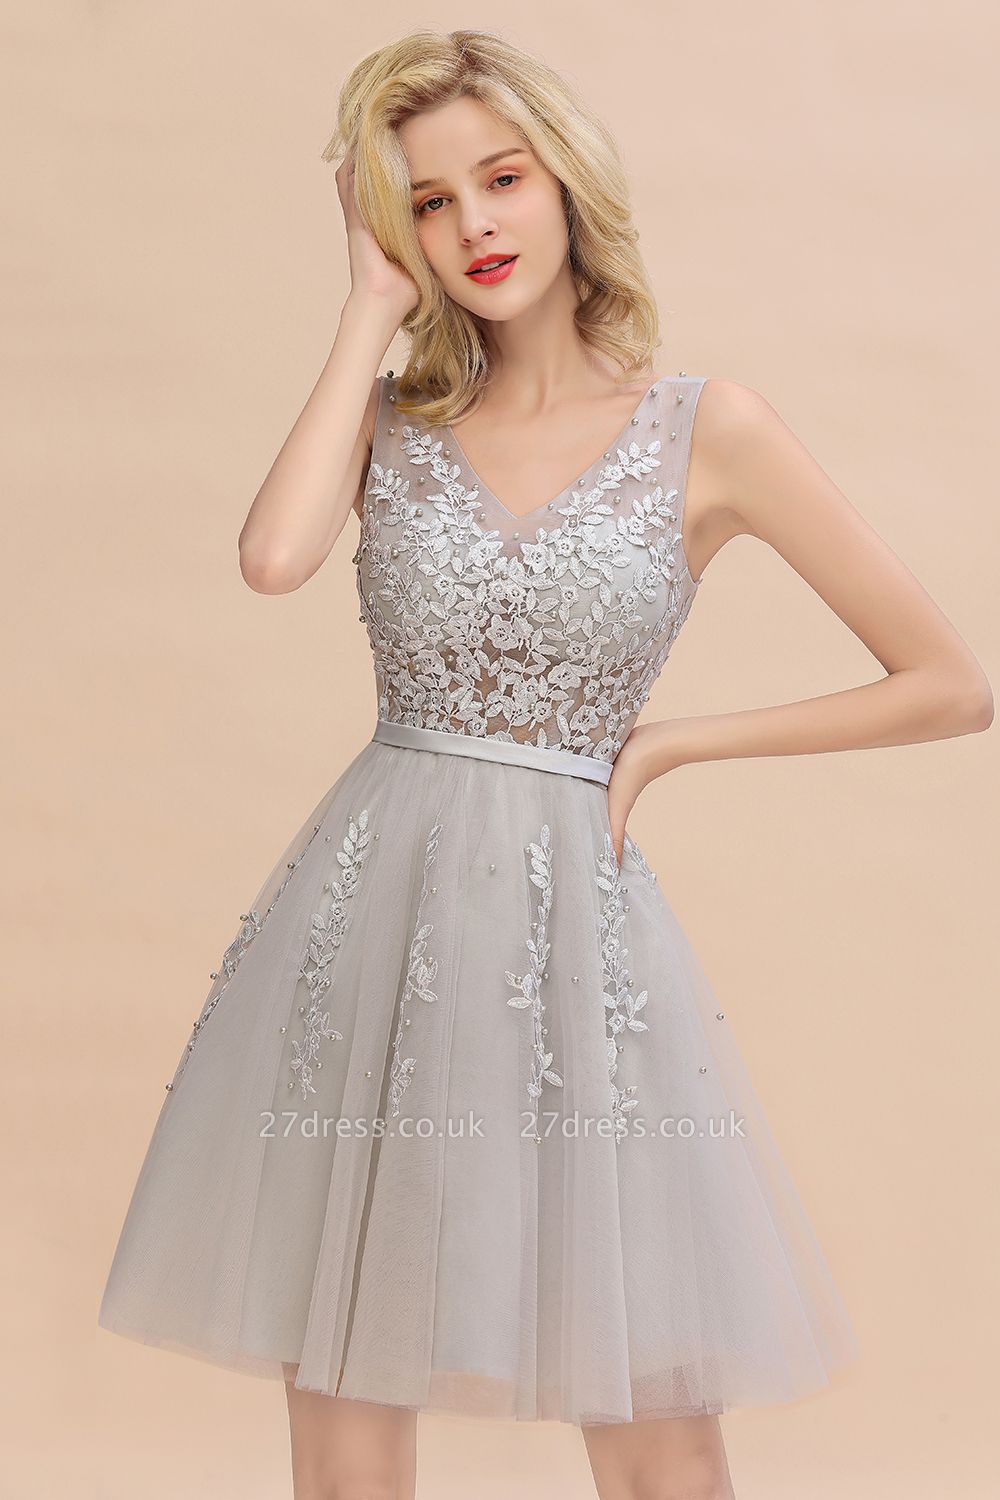 V-neck Lace Homecoming Dresses with Appliques | Short Party Dresses UK Online